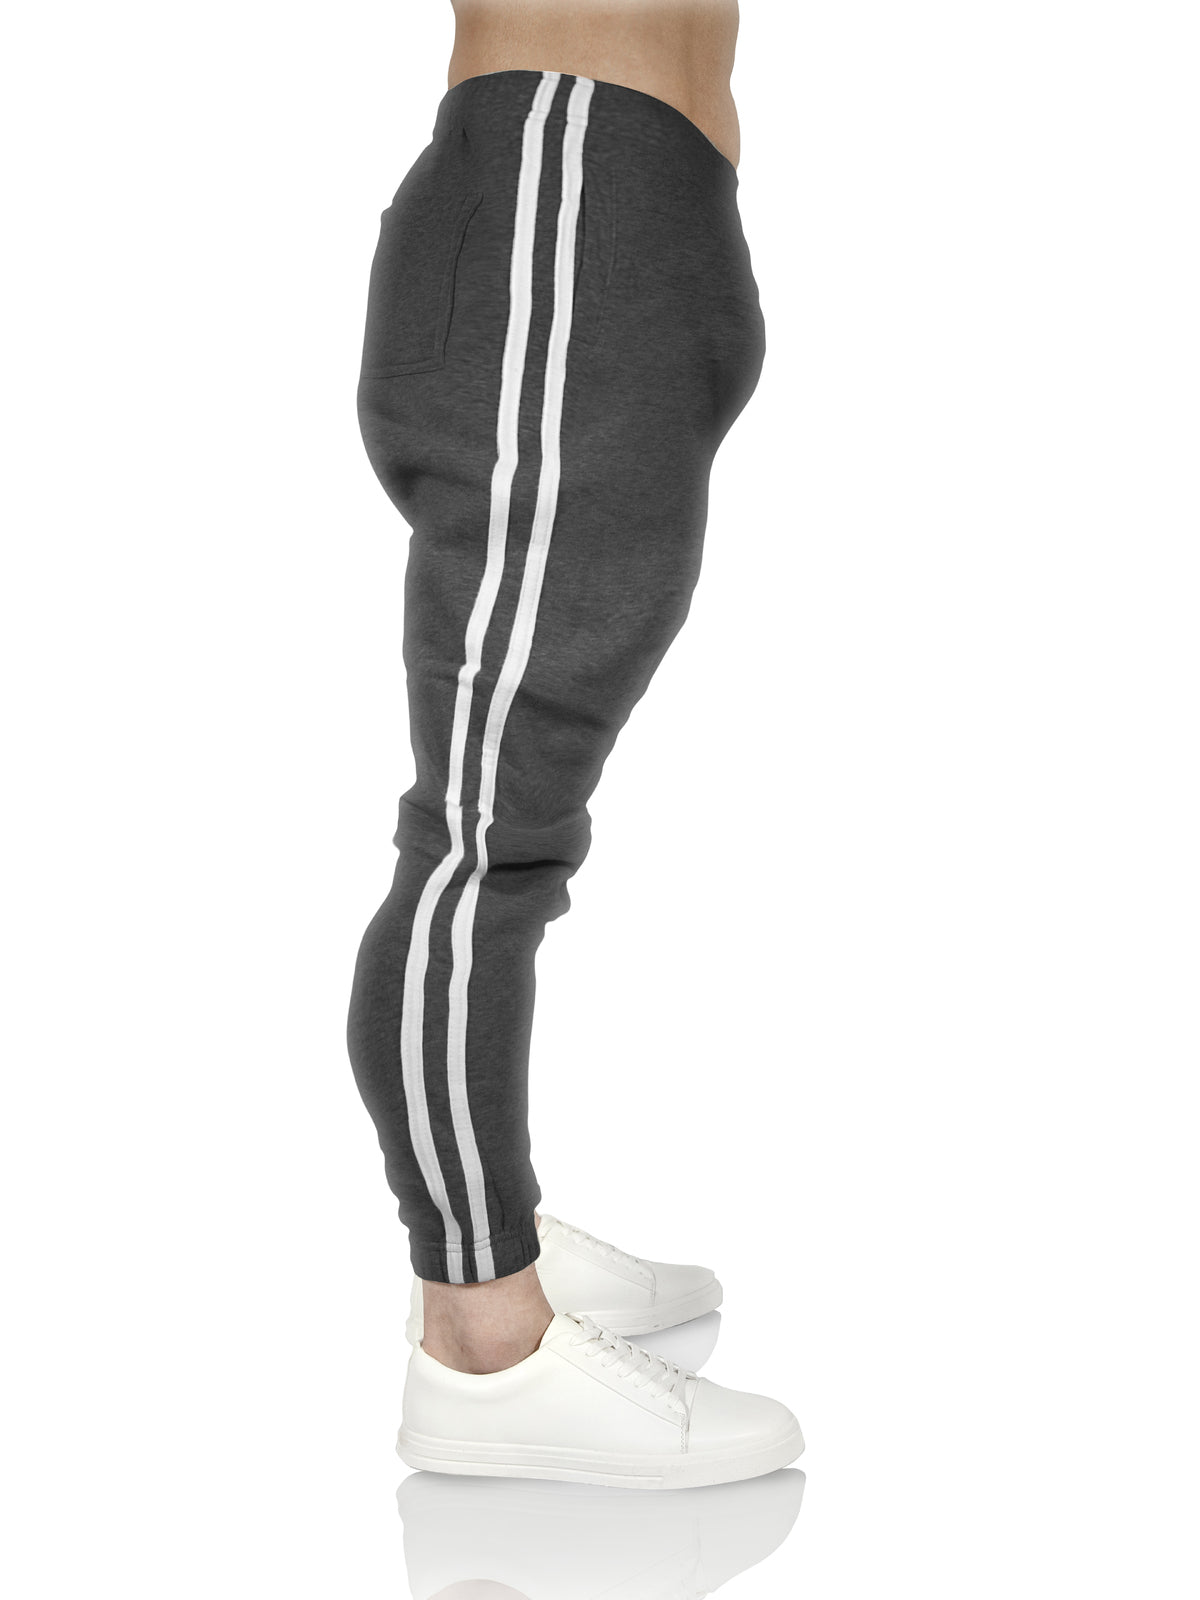 Mens Fleece Skinny Track Pants Jogger Gym Casual Sweat Trackies Warm Trousers - Charcoal Marle/White Stripe - M